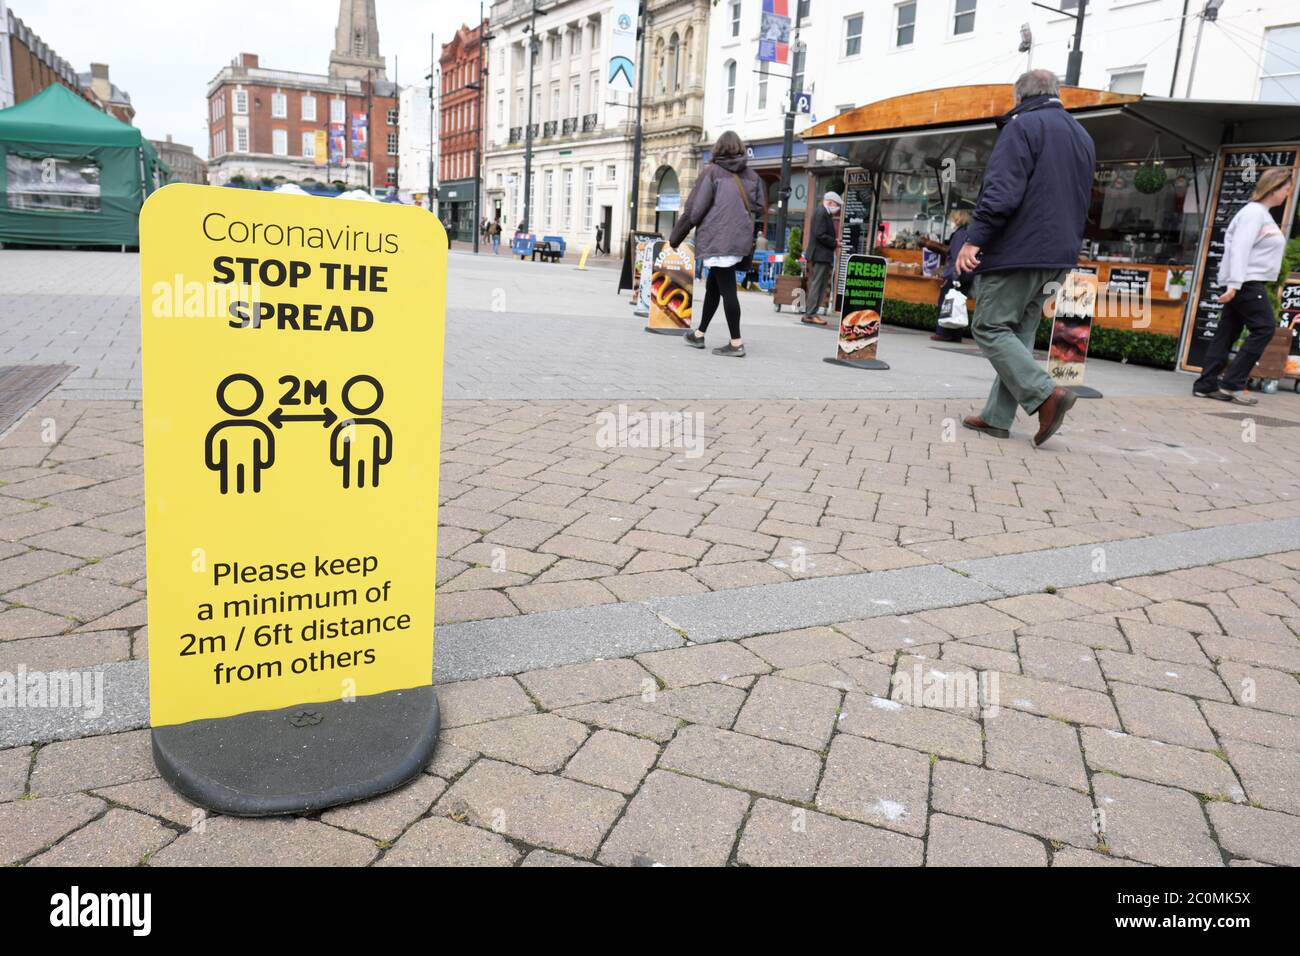 Hereford, Herefordshire UK - Friday 12th June 2020 - New signs and instructions appear as shops and businesses prepare to re-open next week across England as Coronavirus lockdown guidelines are relaxed. Photo Steven May / Alamy Live News Stock Photo